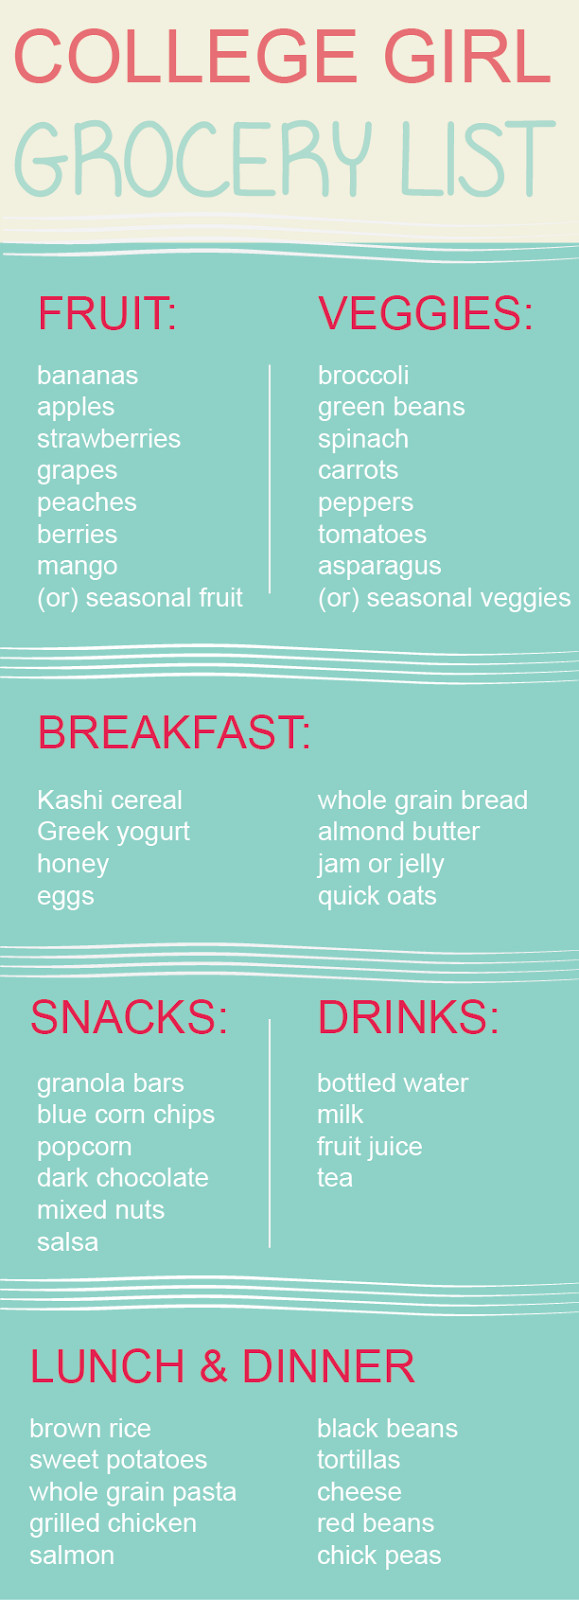 List Of Healthy Snacks For College Students
 Cable flys middle healthy food shopping list college student